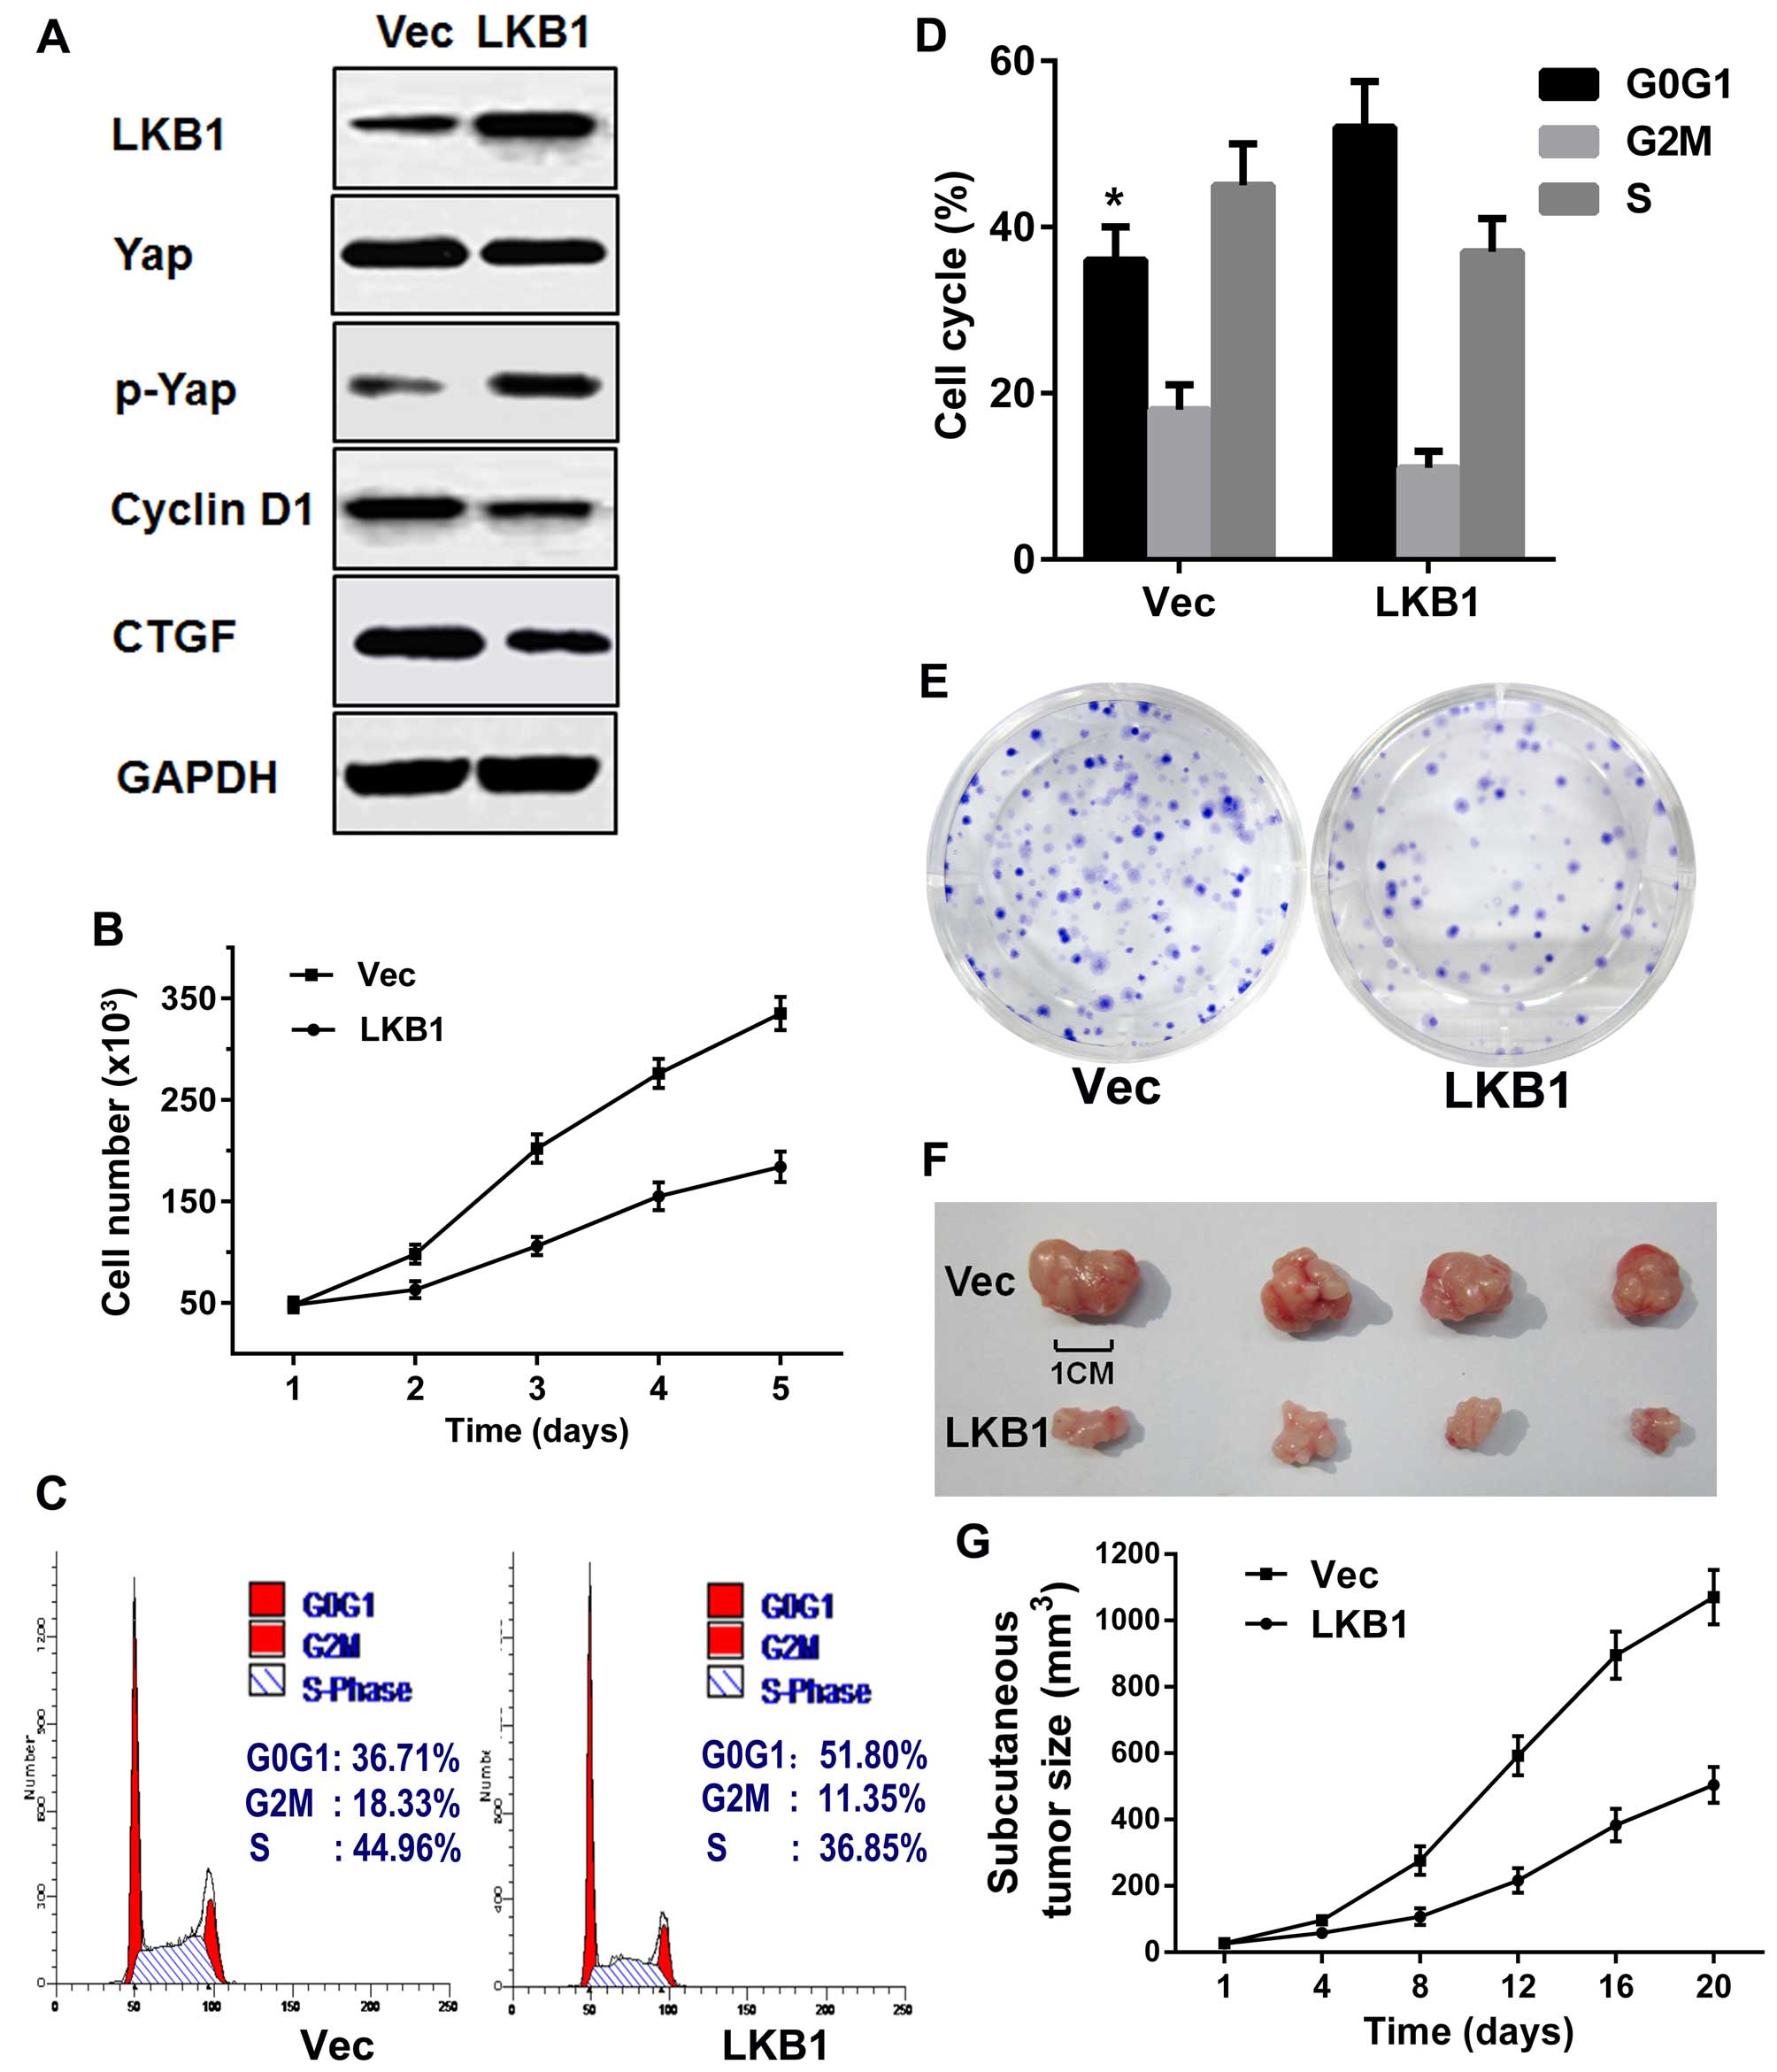 International Journal of Molecular Medicine LKB1 inhibits the proliferation of gastric cancer cells by suppressing the nuclear translocation of Yap and β-catenin